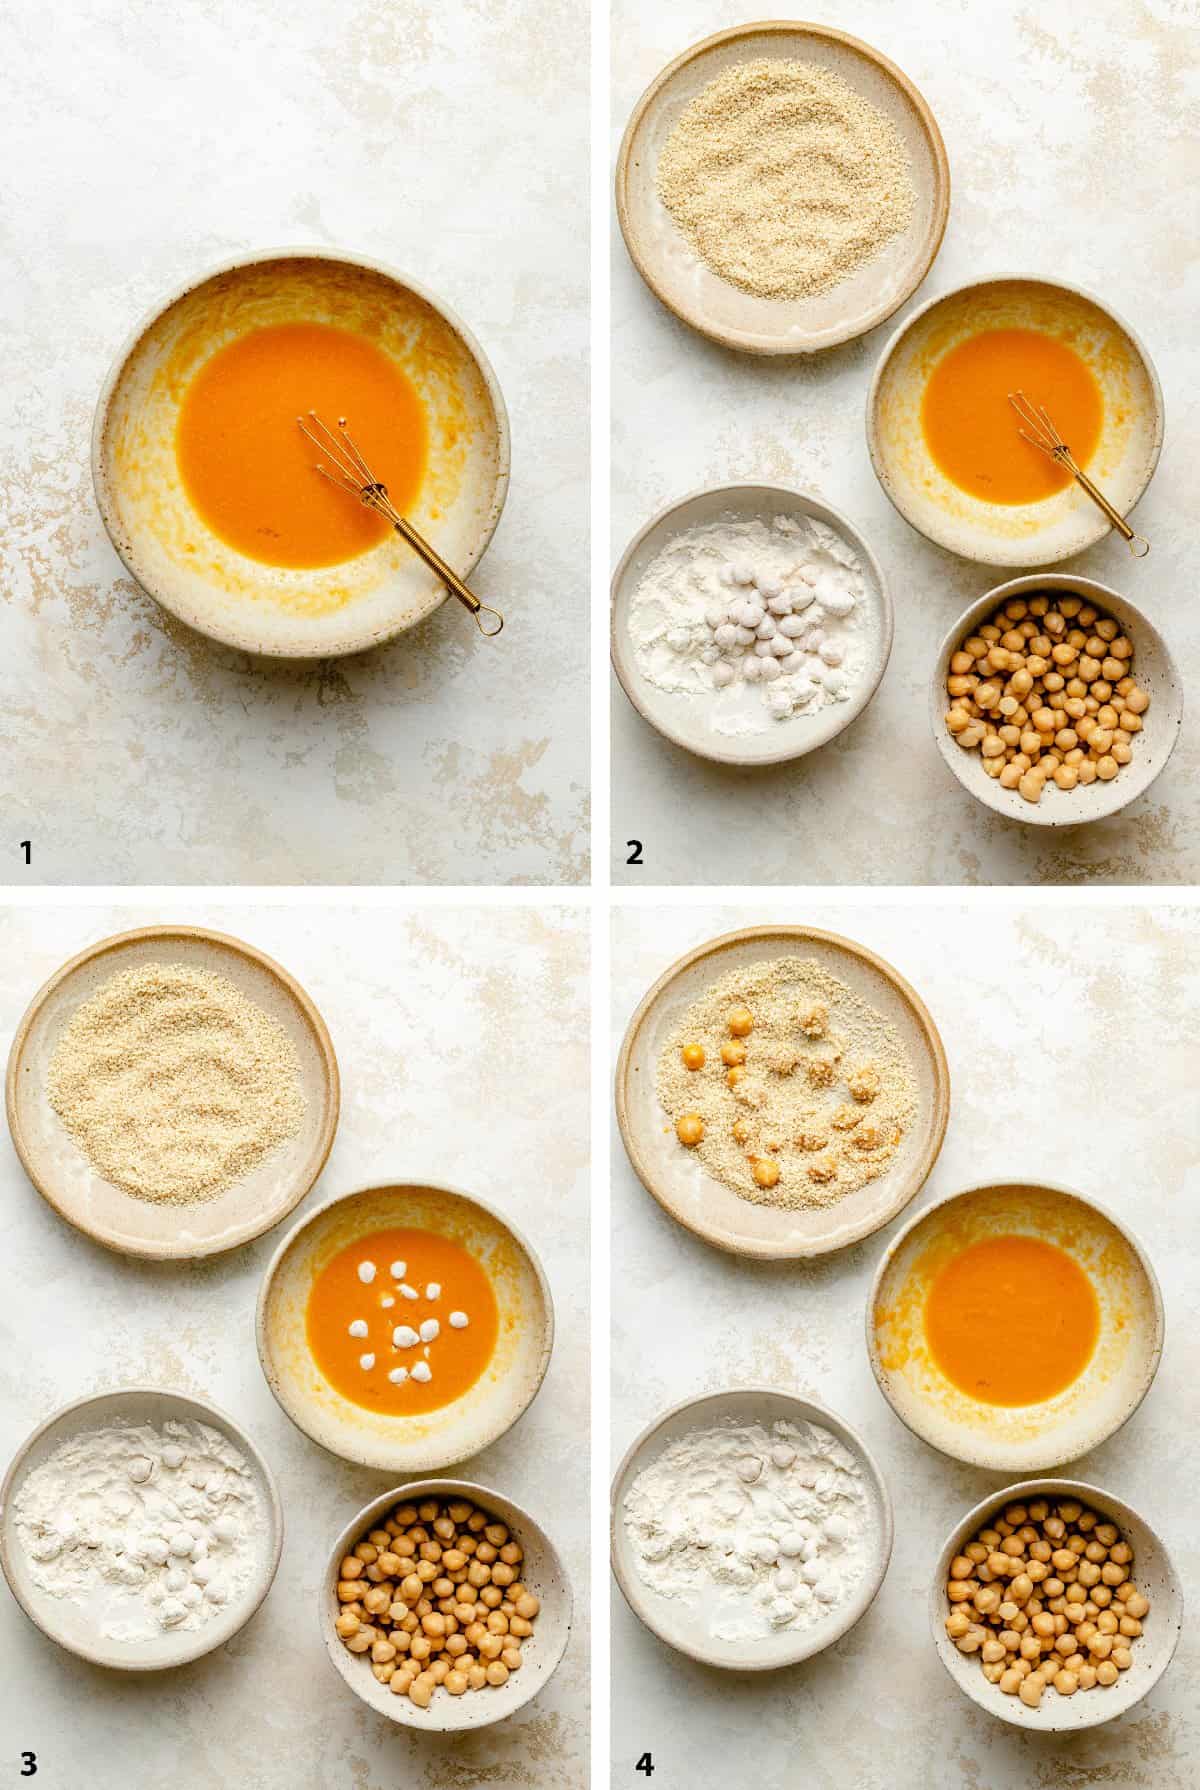 Process steps of coating the crispy chickpeas in sesame seeds.